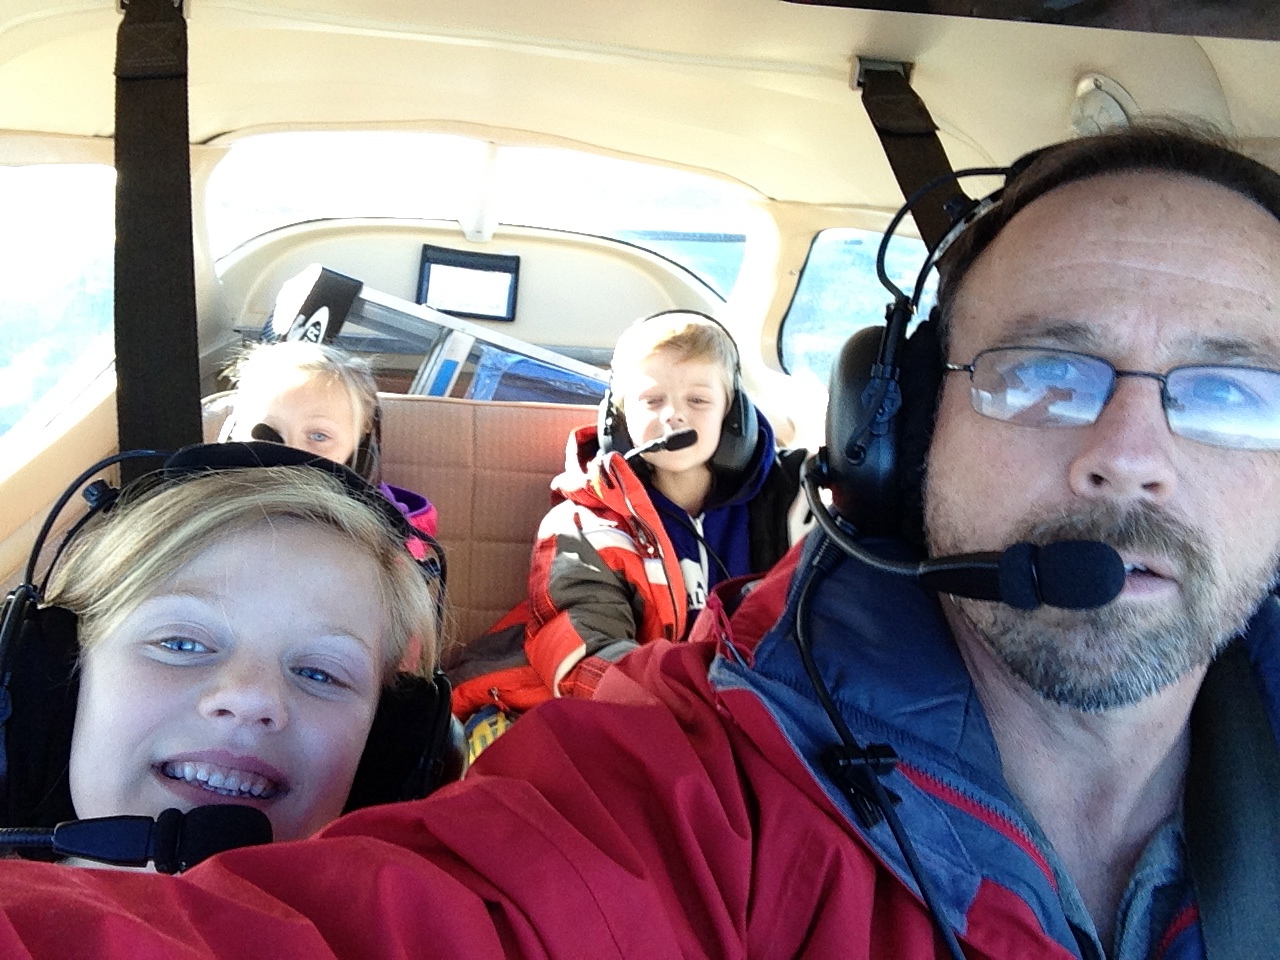 Grandpa taking the kids for a ride in the new plane